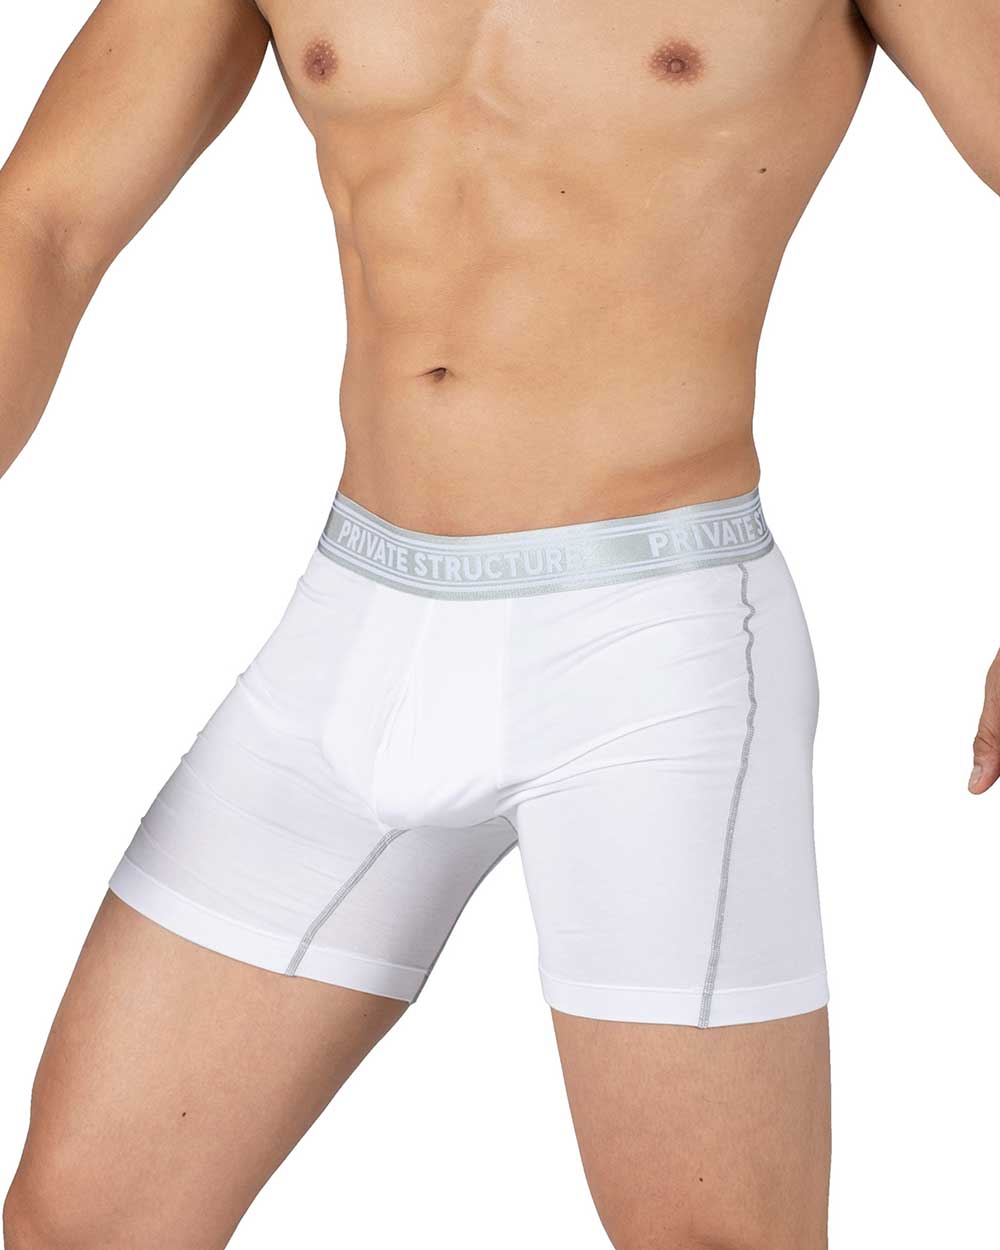 Viscose From Bamboo Mid Waist Boxer Brief - Bright White - [4380]